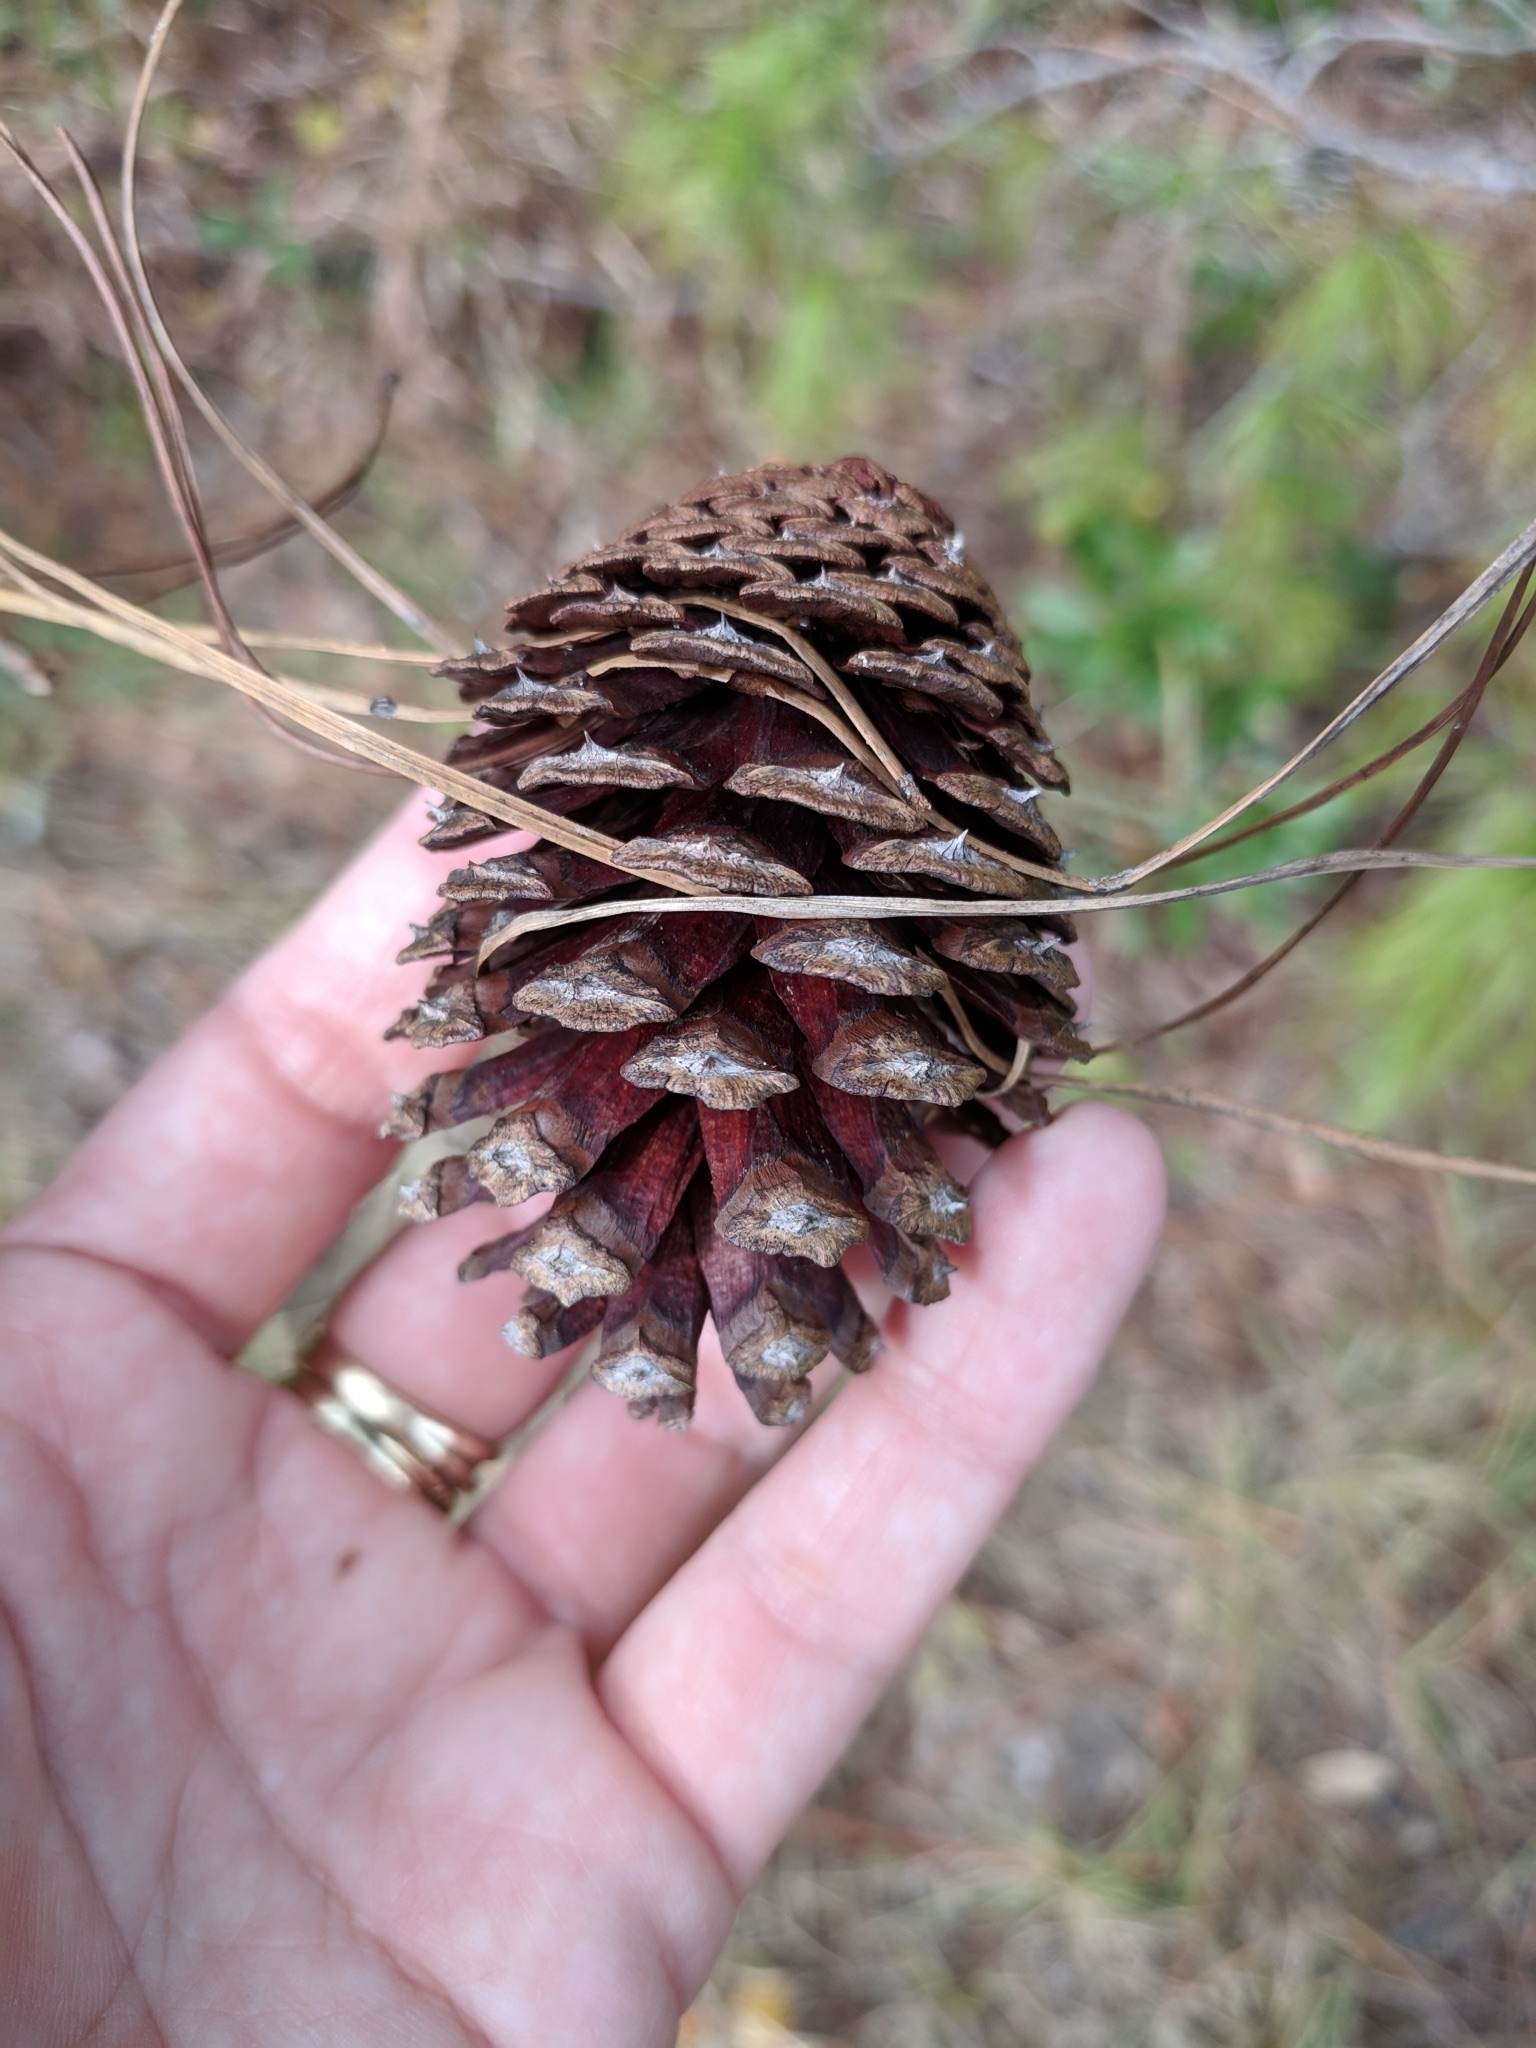 The Scientific Name is Pinus clausa. You will likely hear them called Sand Pine. This picture shows the The 2 to 3.5-inch-long, spiny cones persist for quite a while on the tree, often becoming embedded in the wood of the twigs. -<em>Univ of FL Extension</em> of Pinus clausa